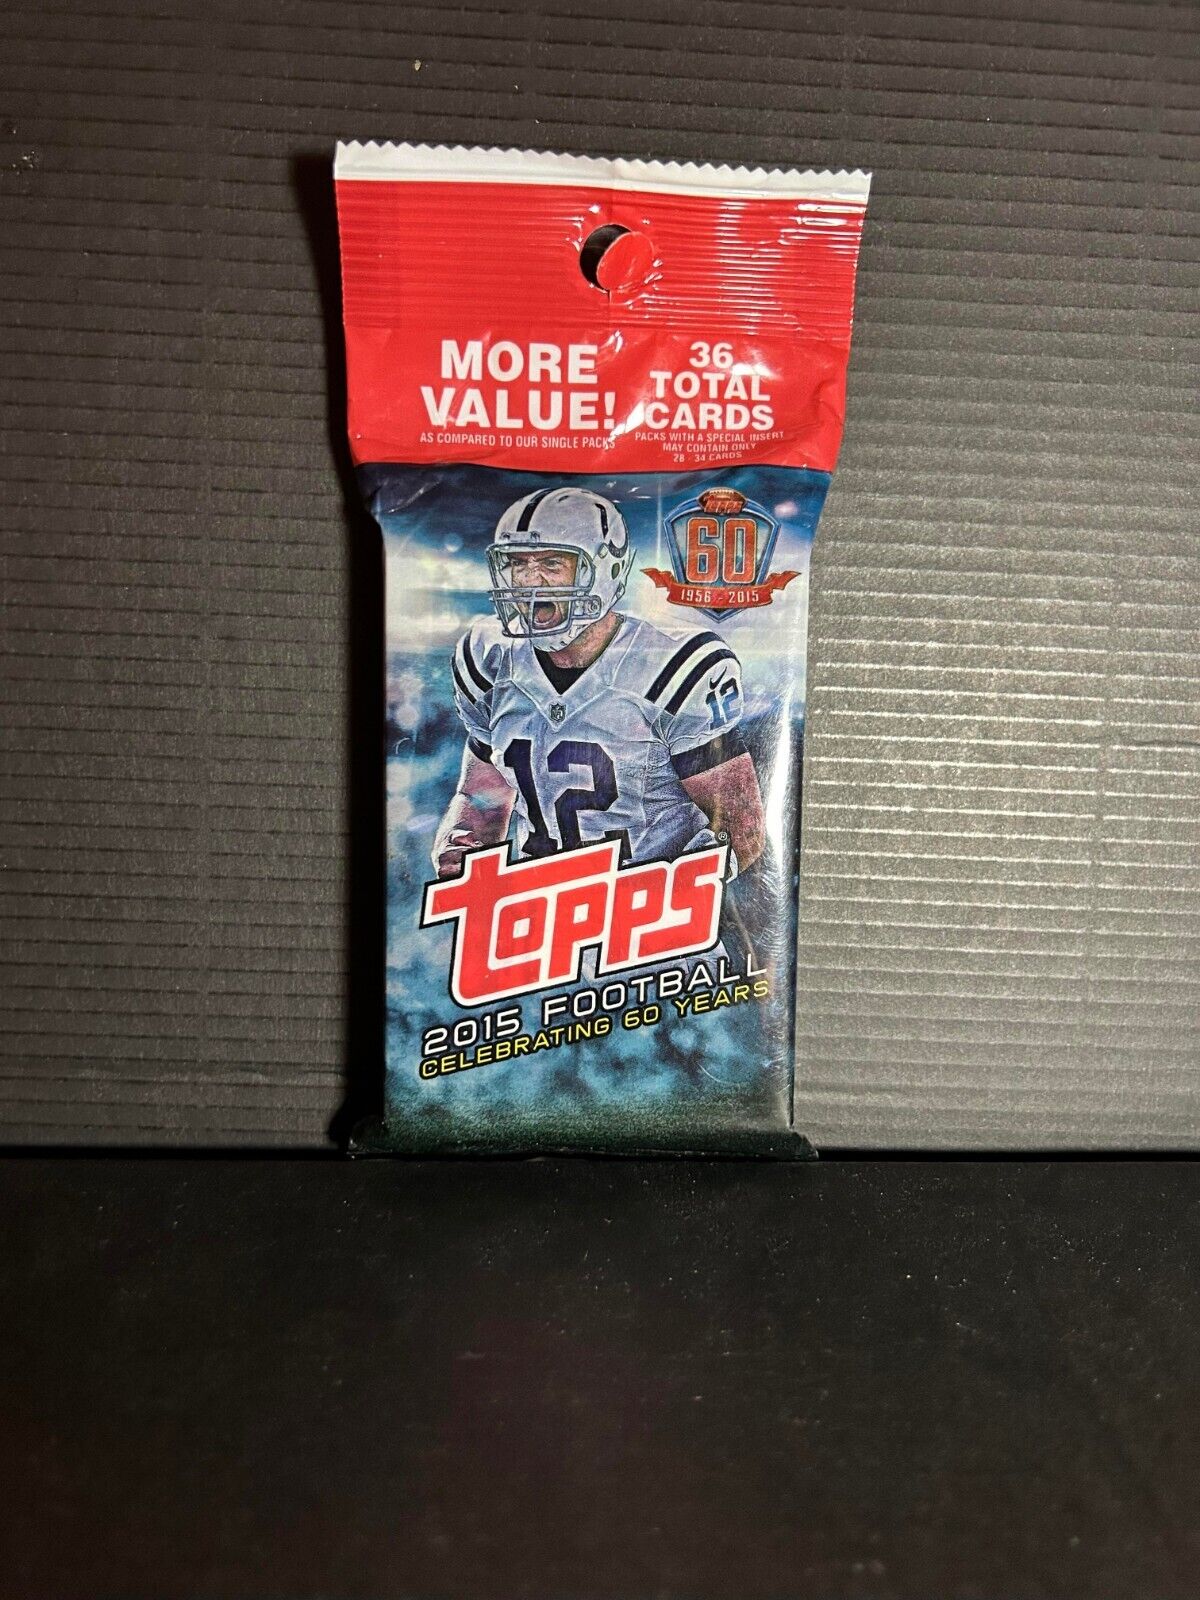 2015 TOPPS FOOTBALL 60 YEARS MORE VALUE FAT PACK 36 CARDS TOTAL NEW SEALED